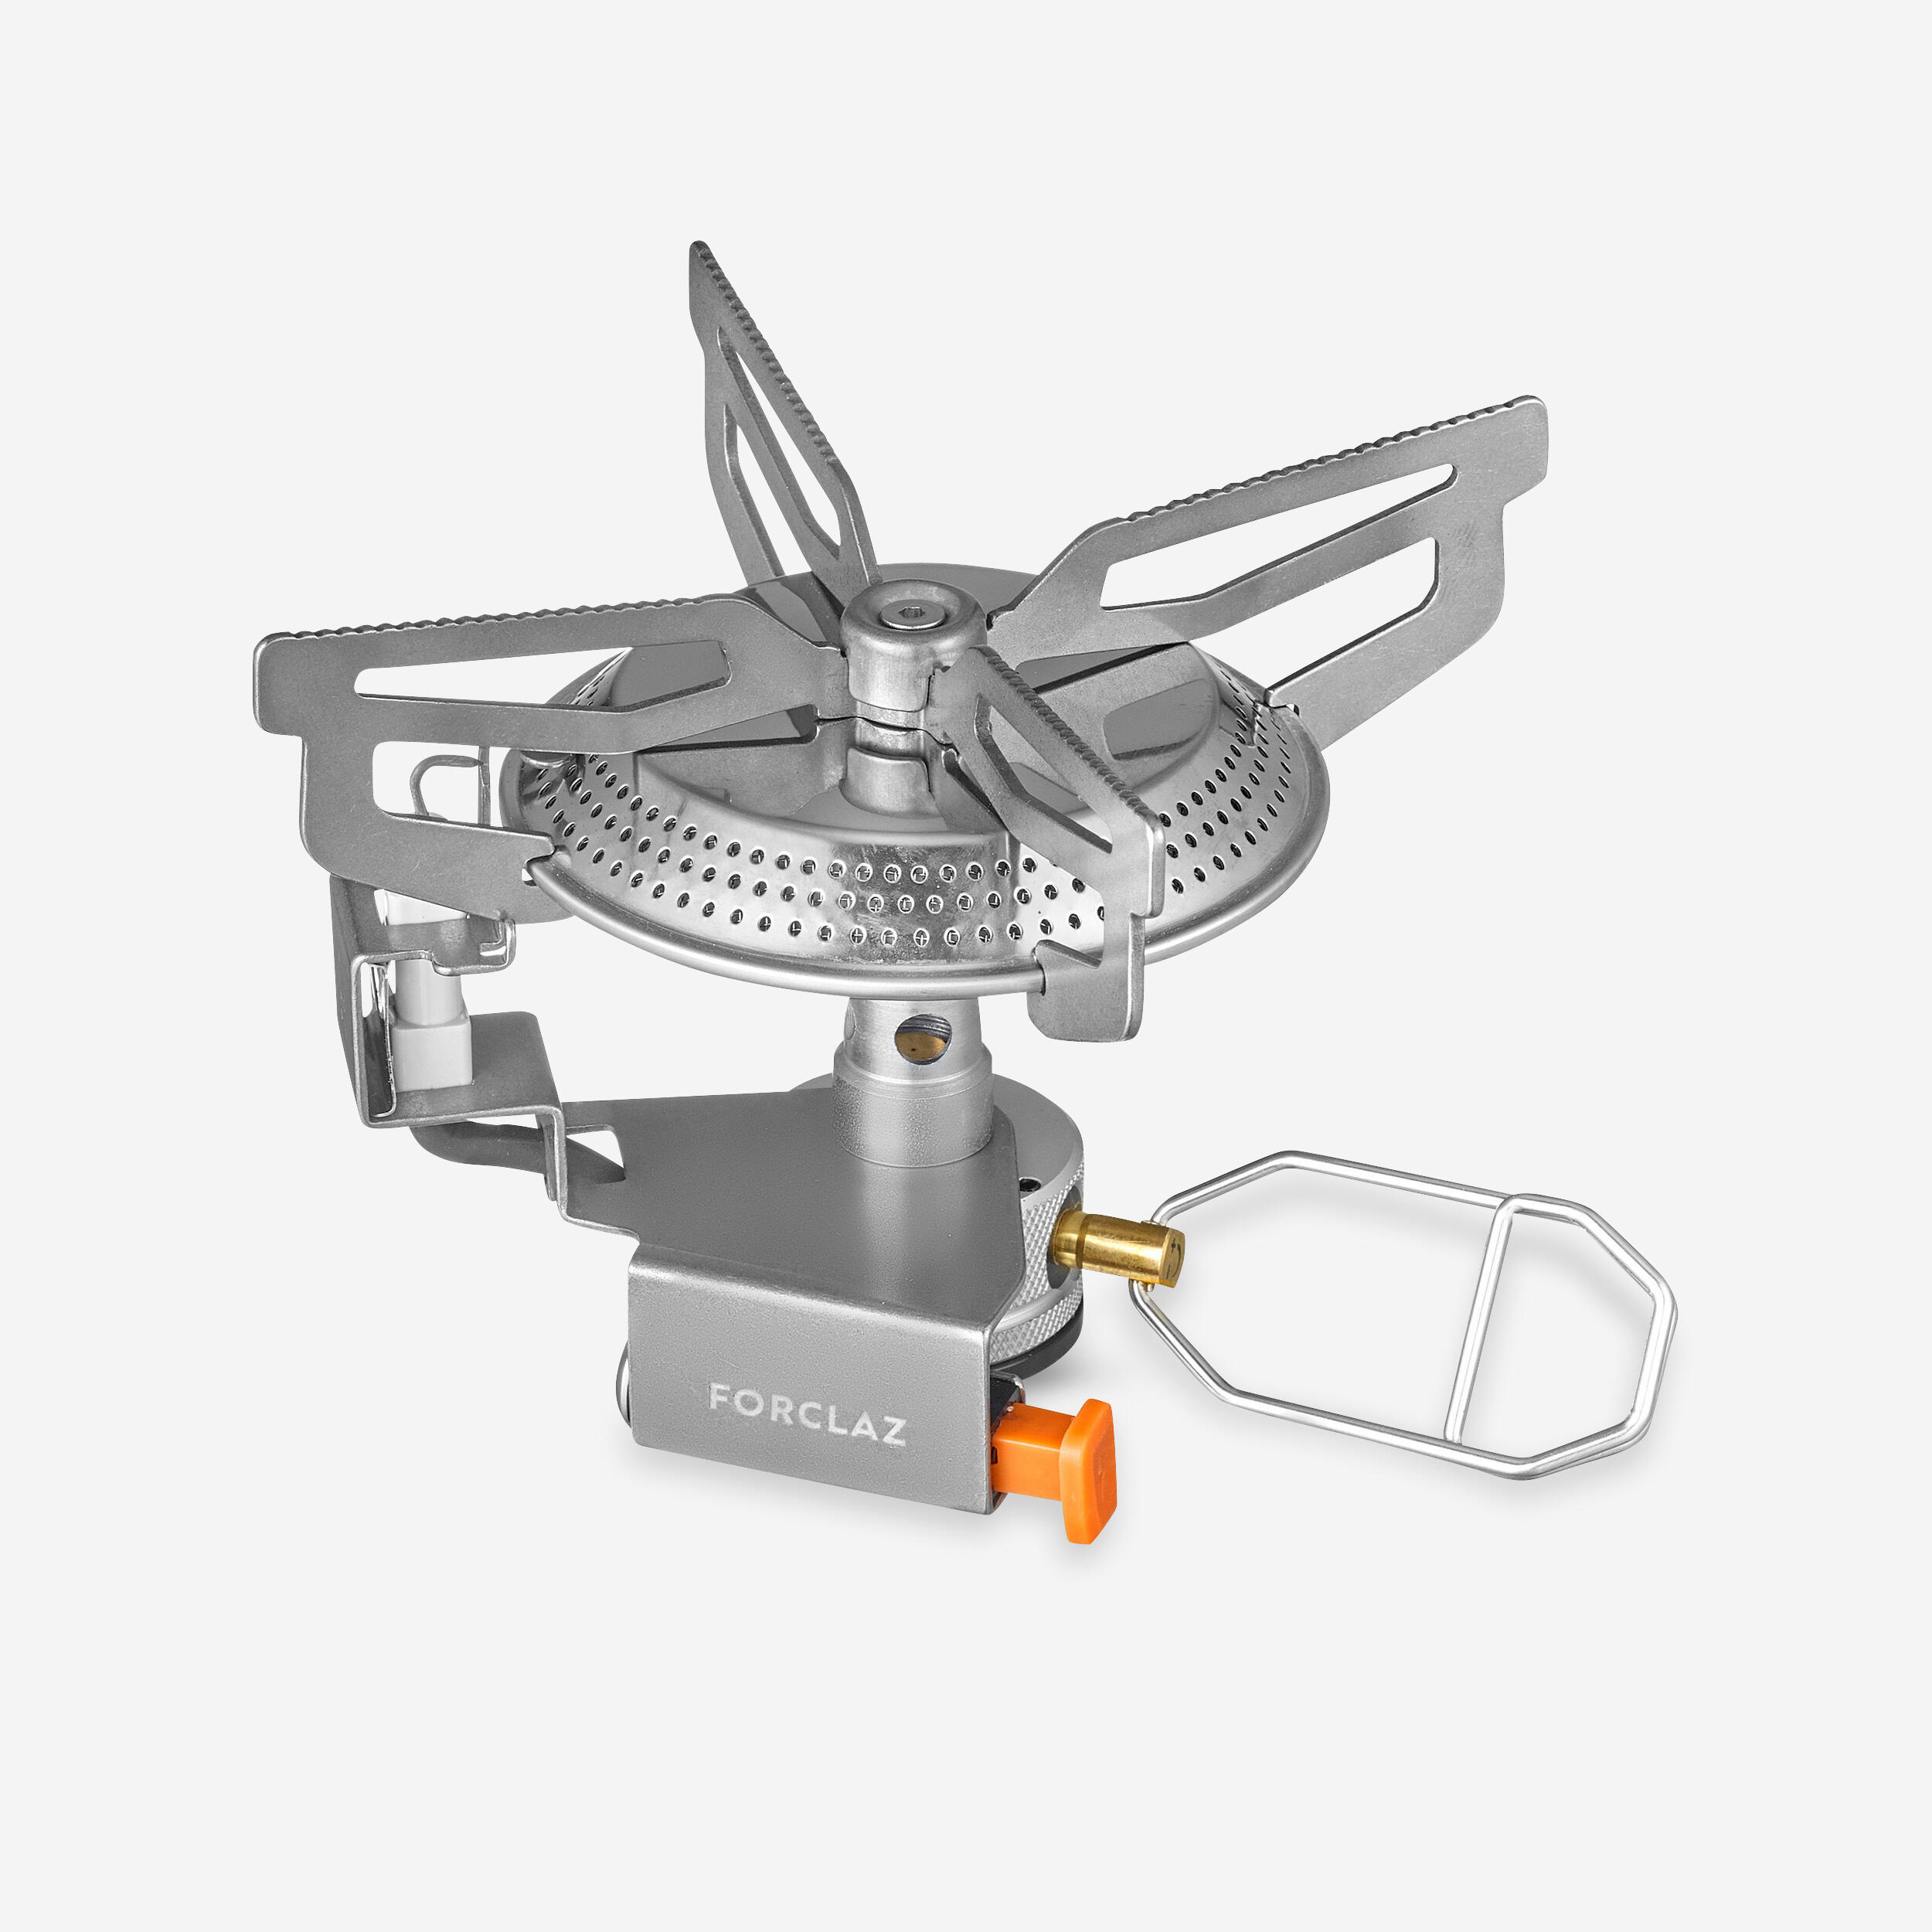 FORCLAZ Gas stove with lighter - MT100